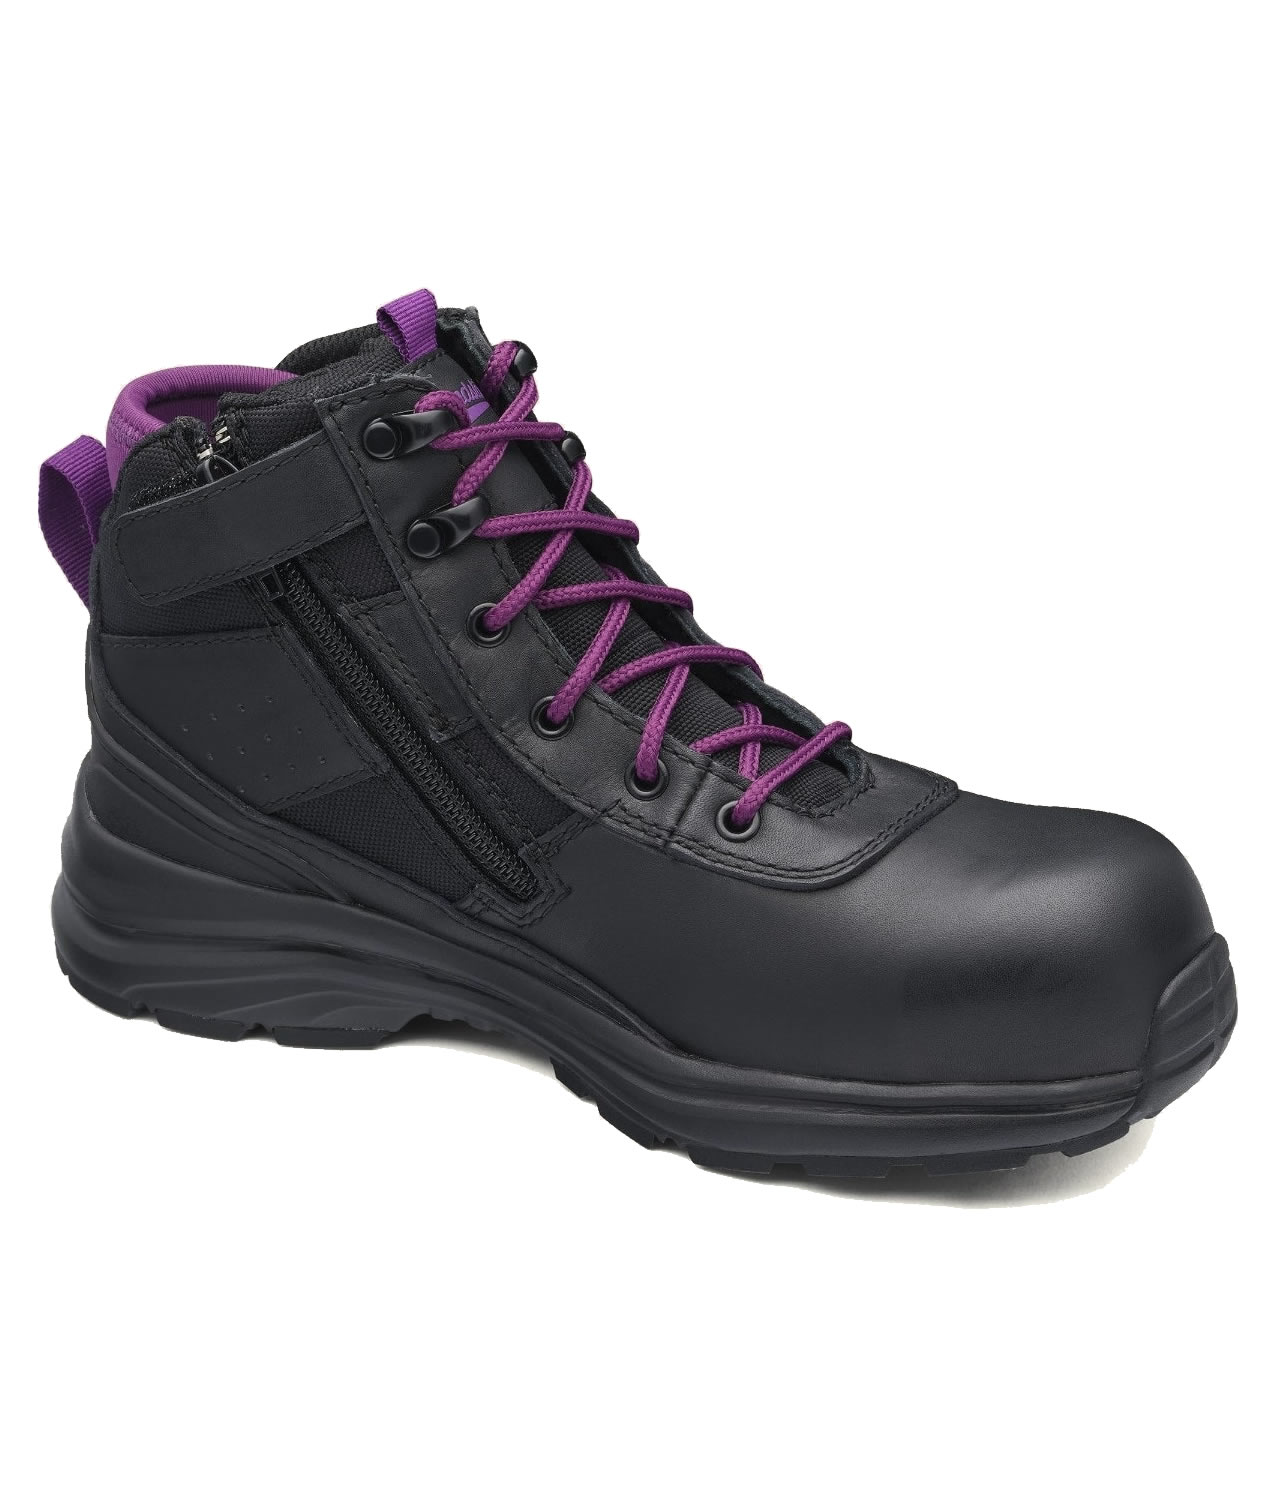 Blundstone Women's Safety Boots - Style 887 - Black and Purple